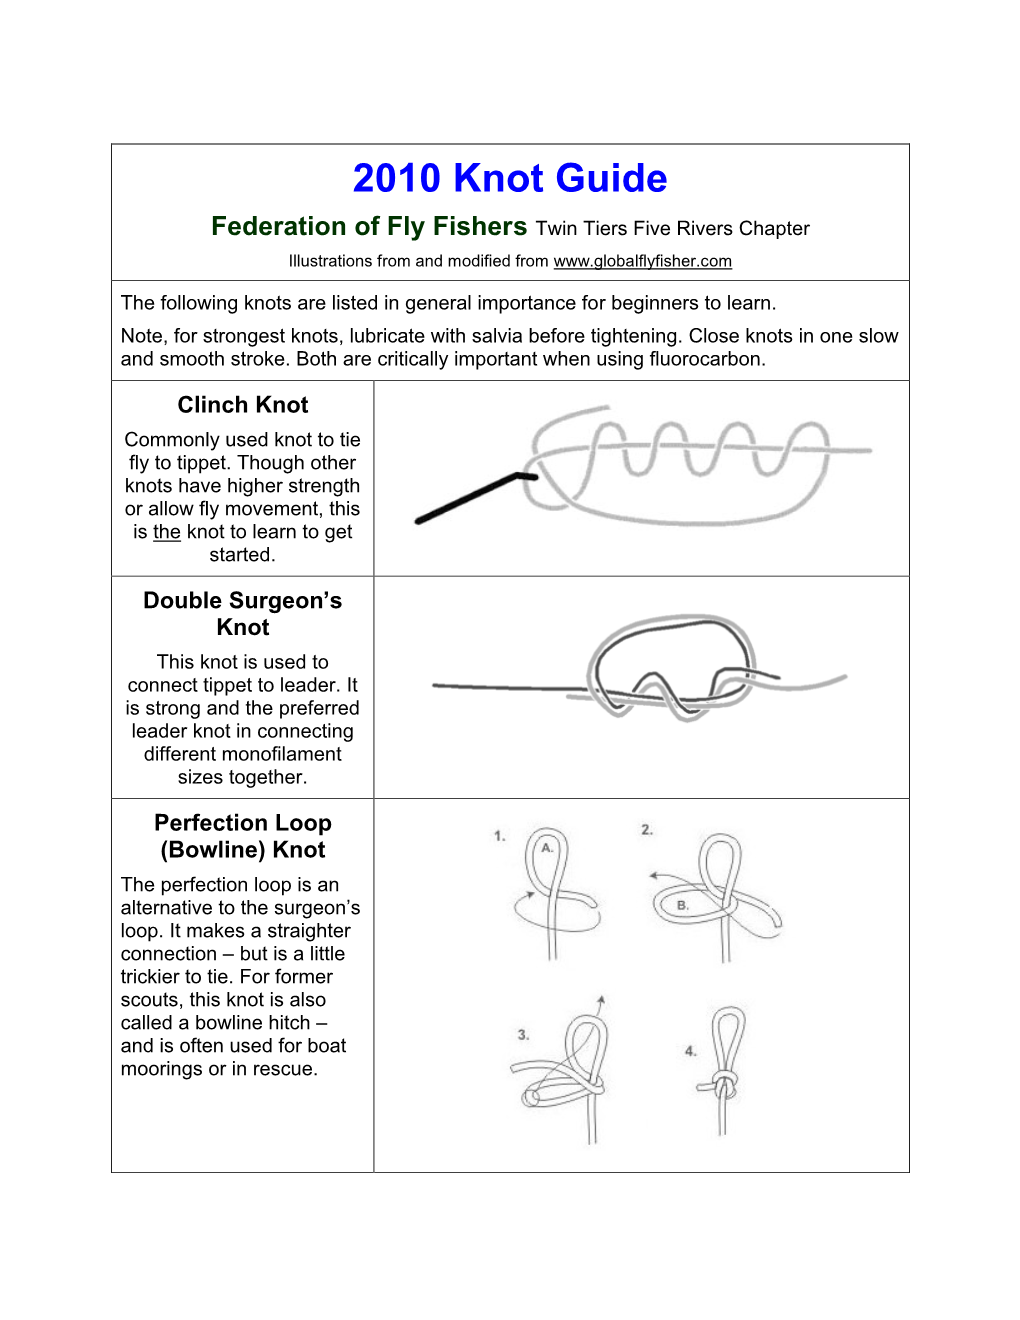 2010 Knot Guide Federation of Fly Fishers Twin Tiers Five Rivers Chapter Illustrations from and Modified From